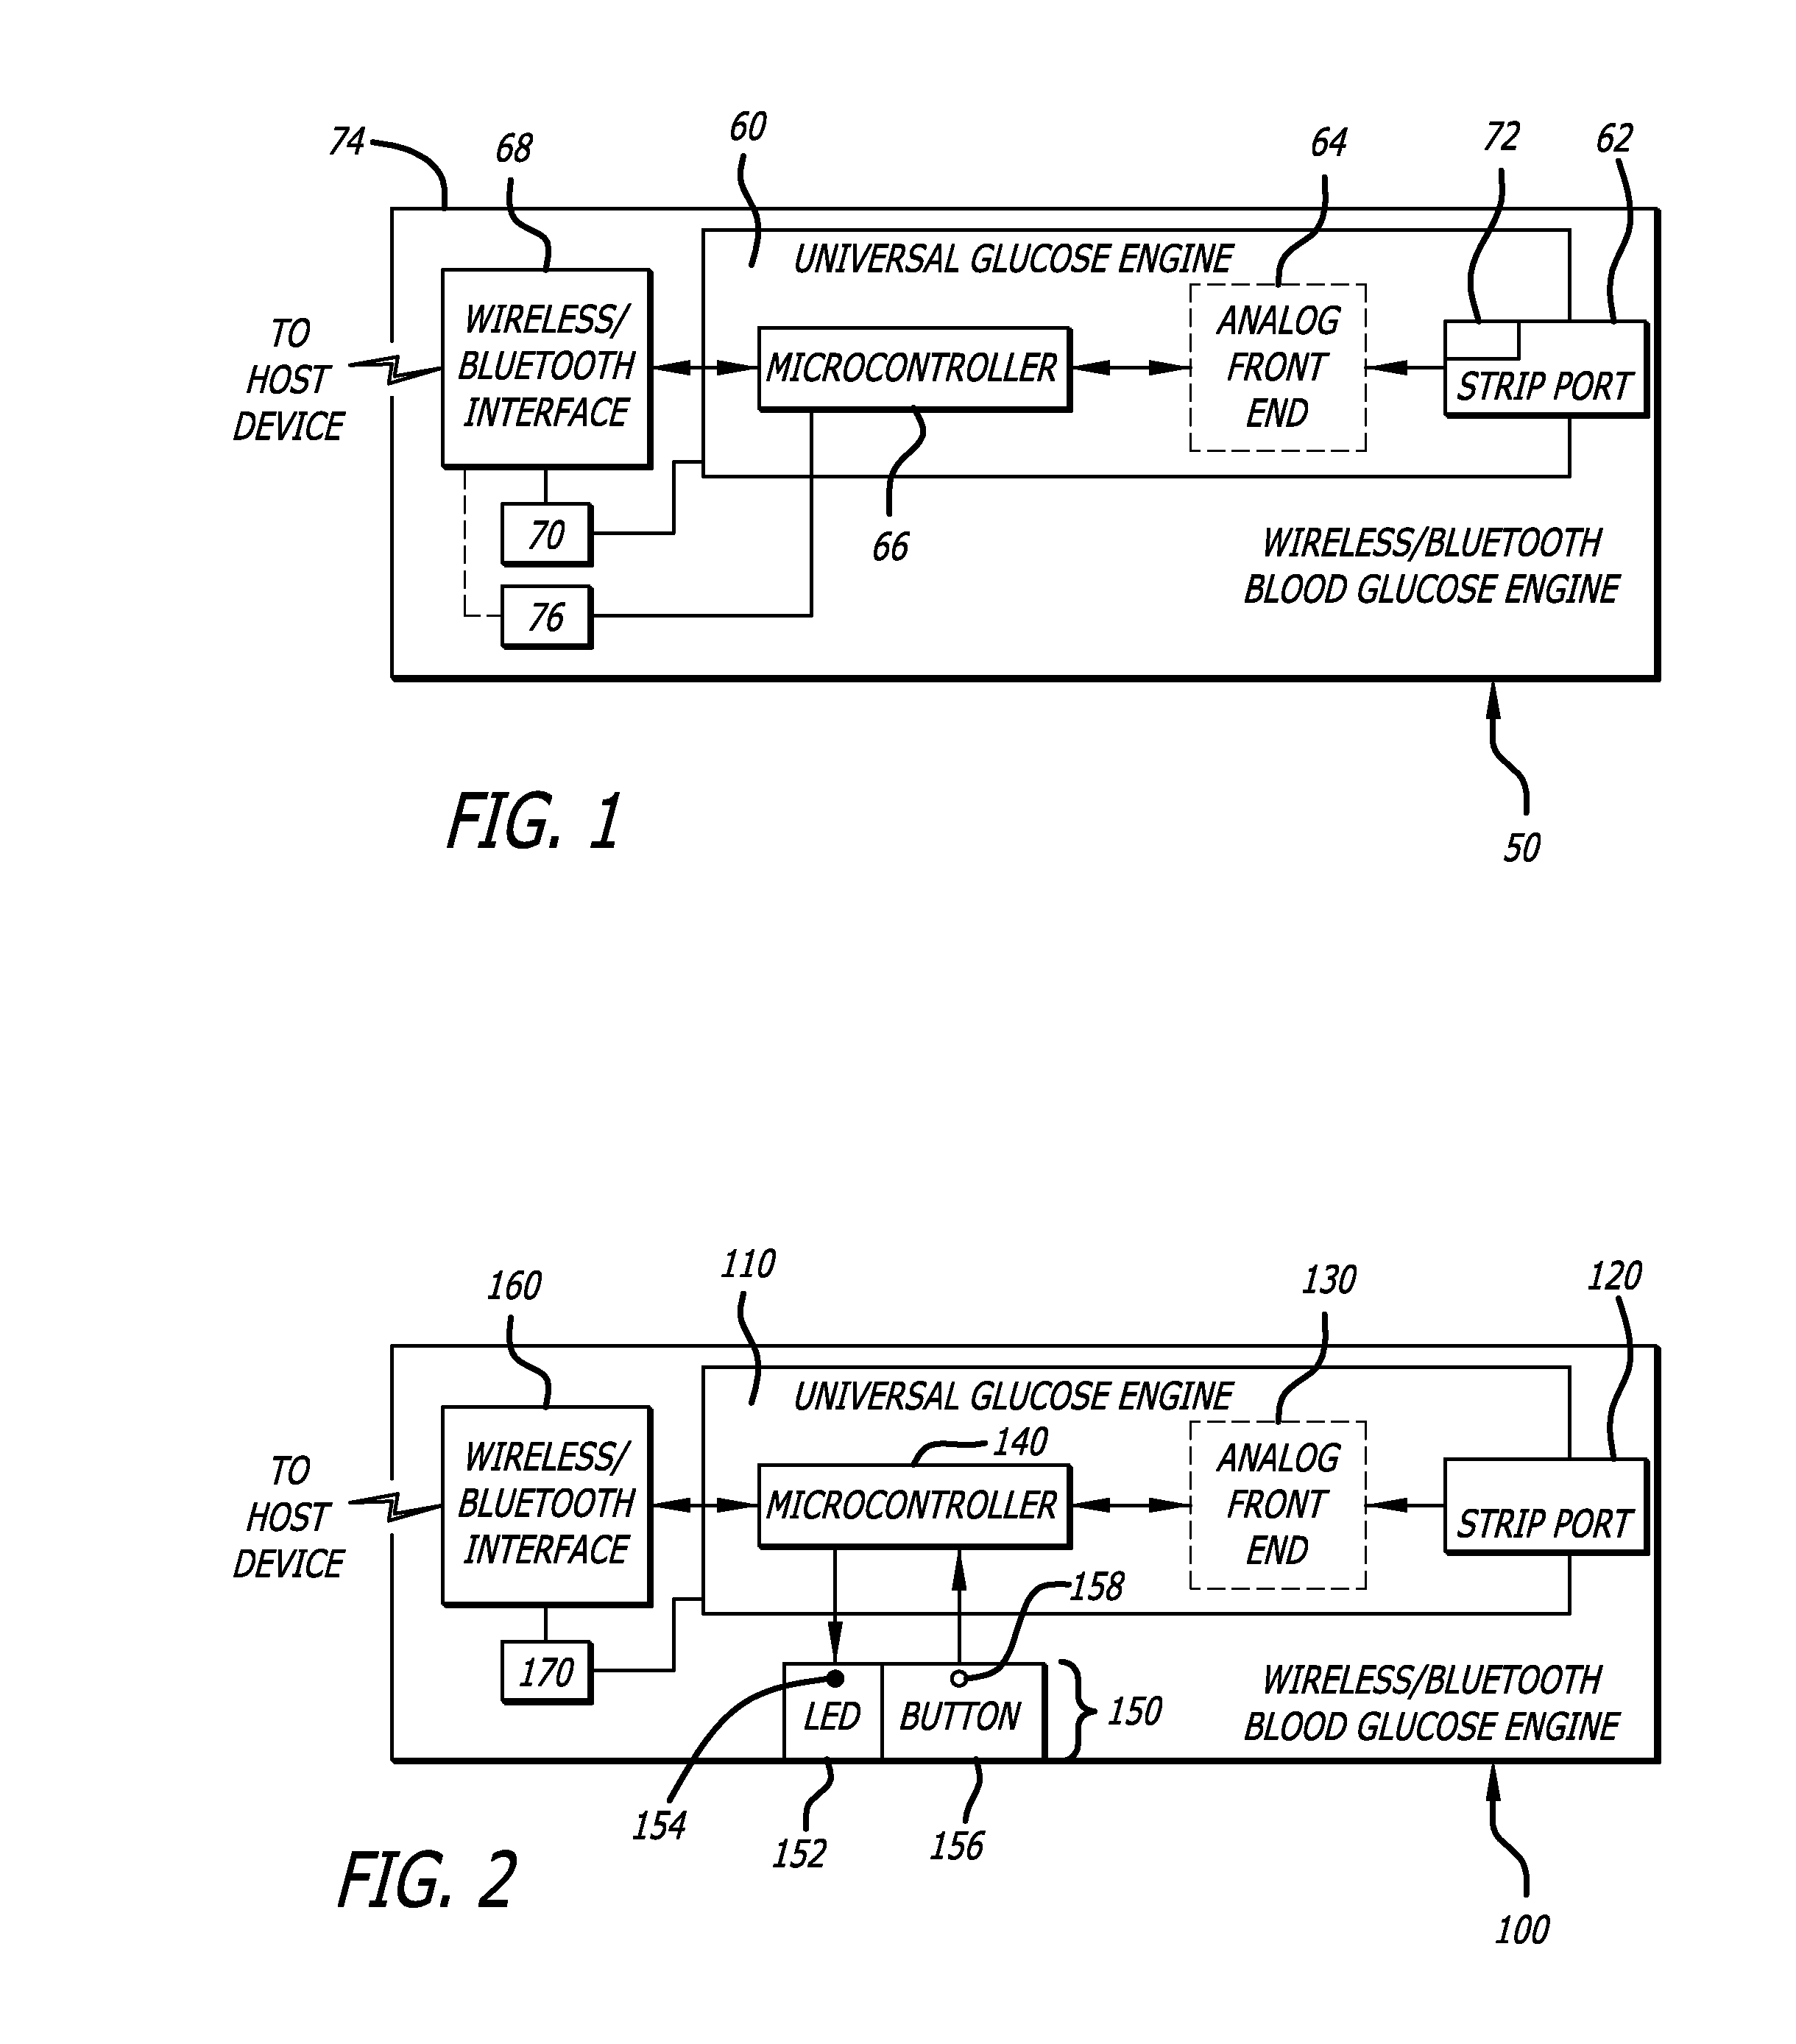 Glucose monitoring system with wireless communications